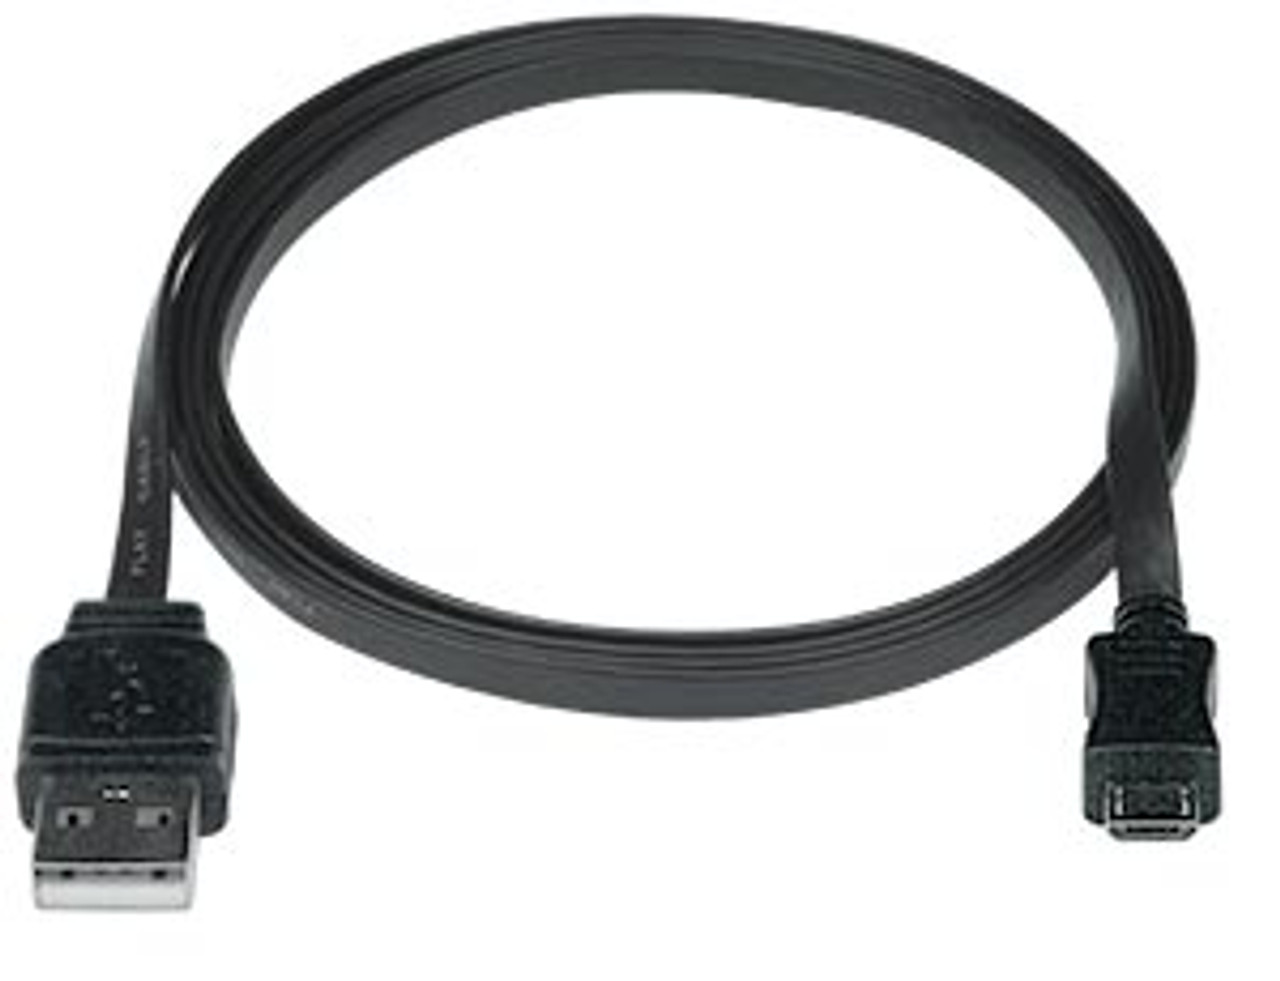 USB micro-B Cable - 6 Foot